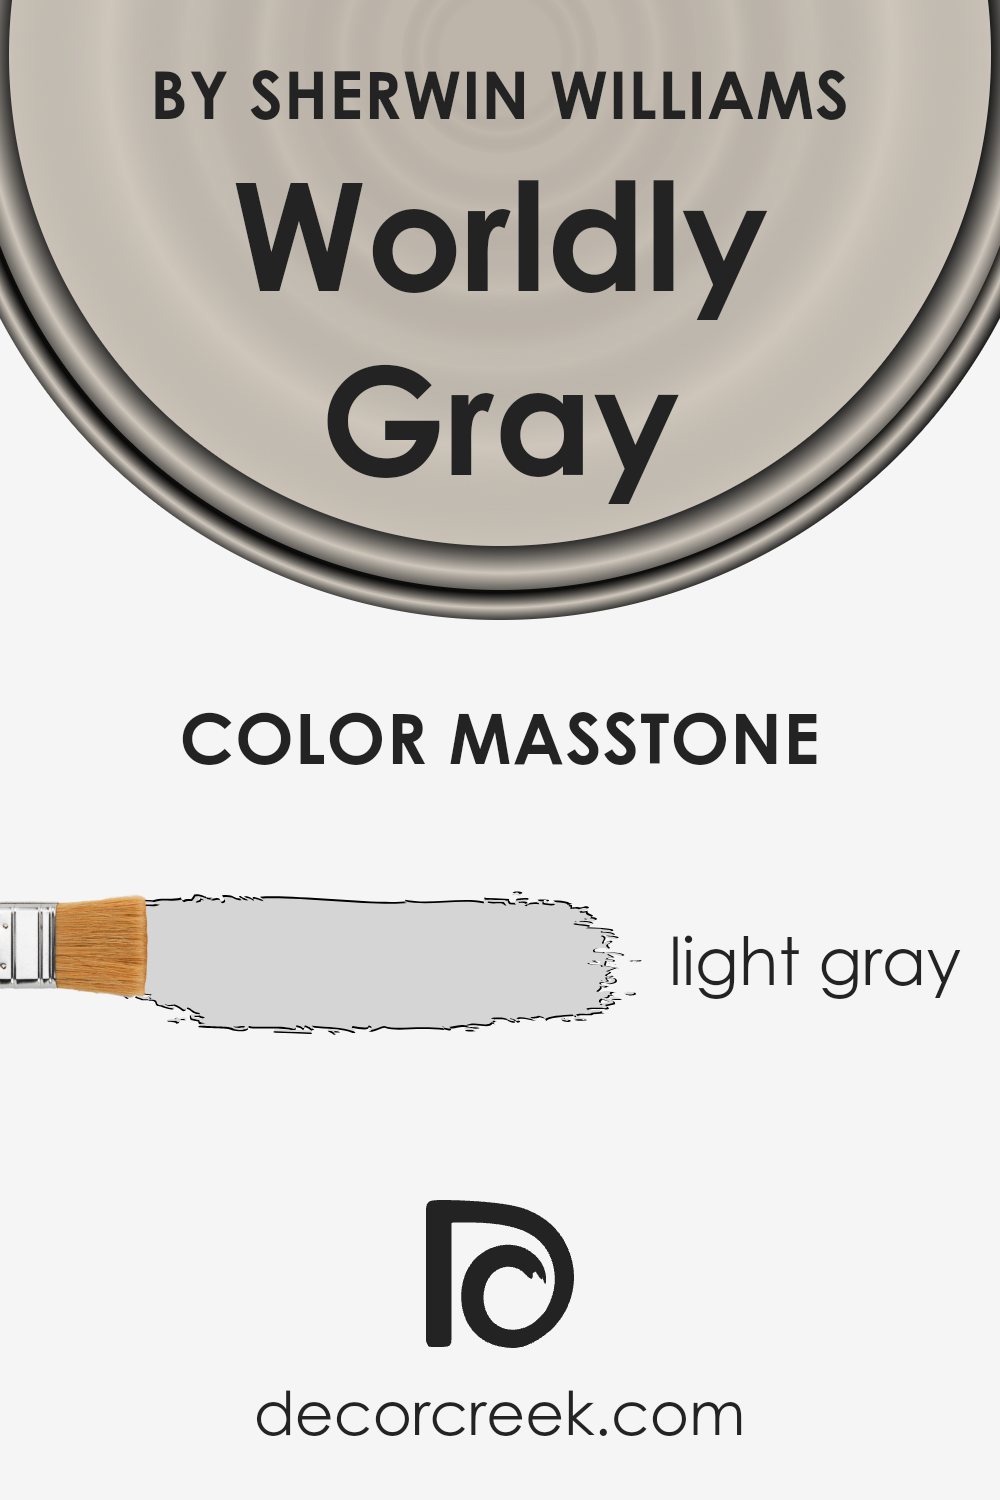 what_is_the_masstone_of_worldly_gray_sw_7043